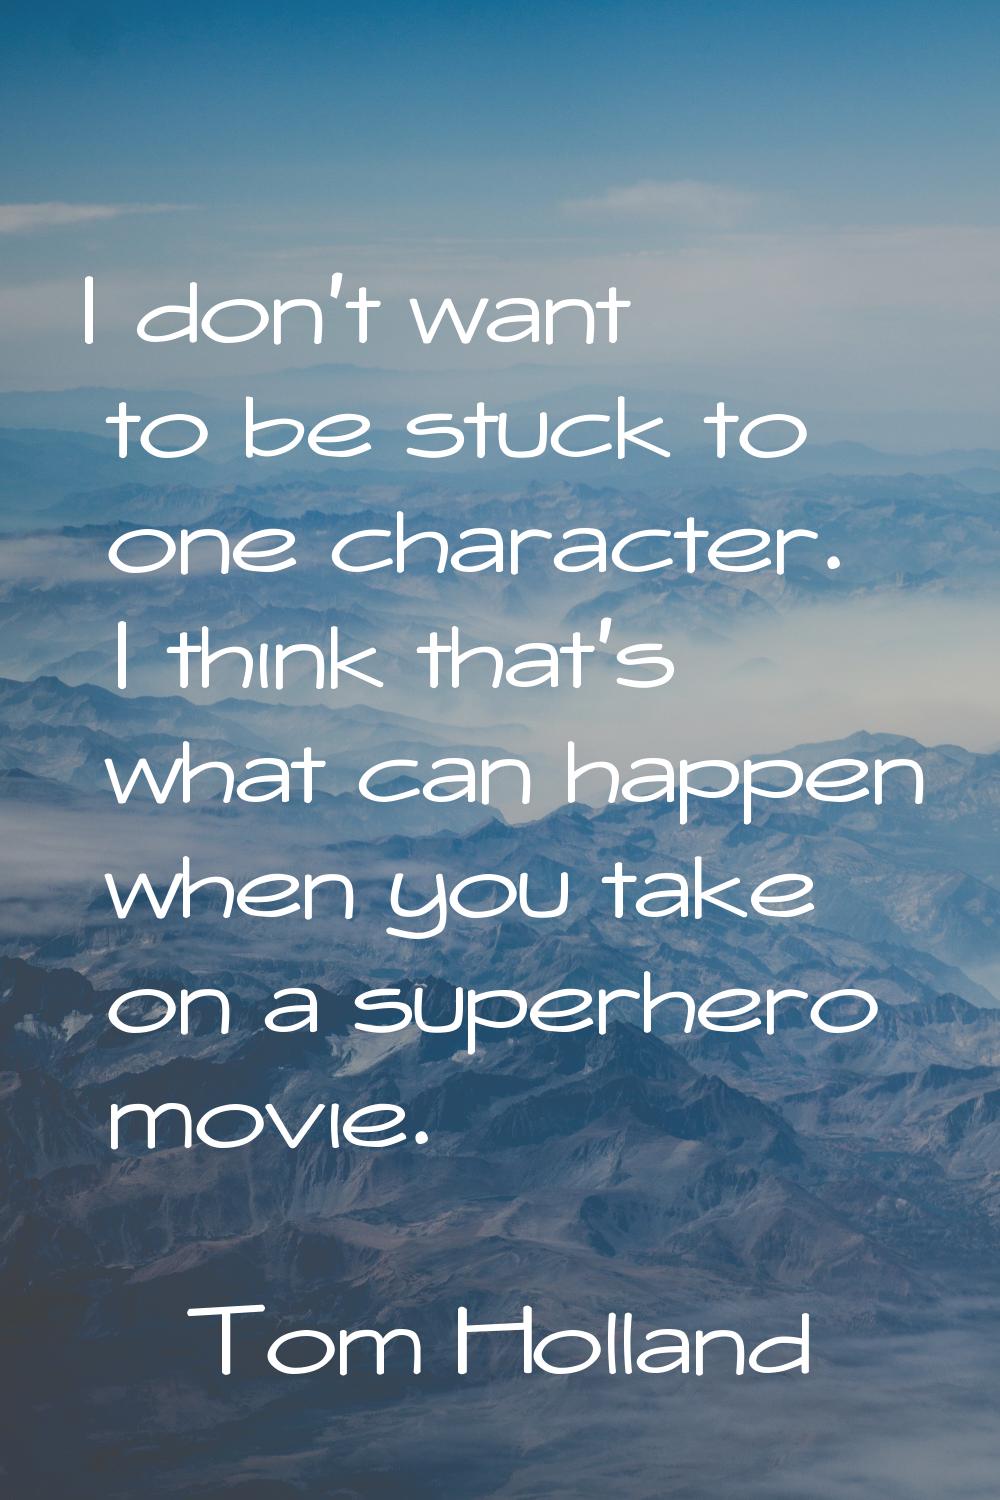 I don't want to be stuck to one character. I think that's what can happen when you take on a superh